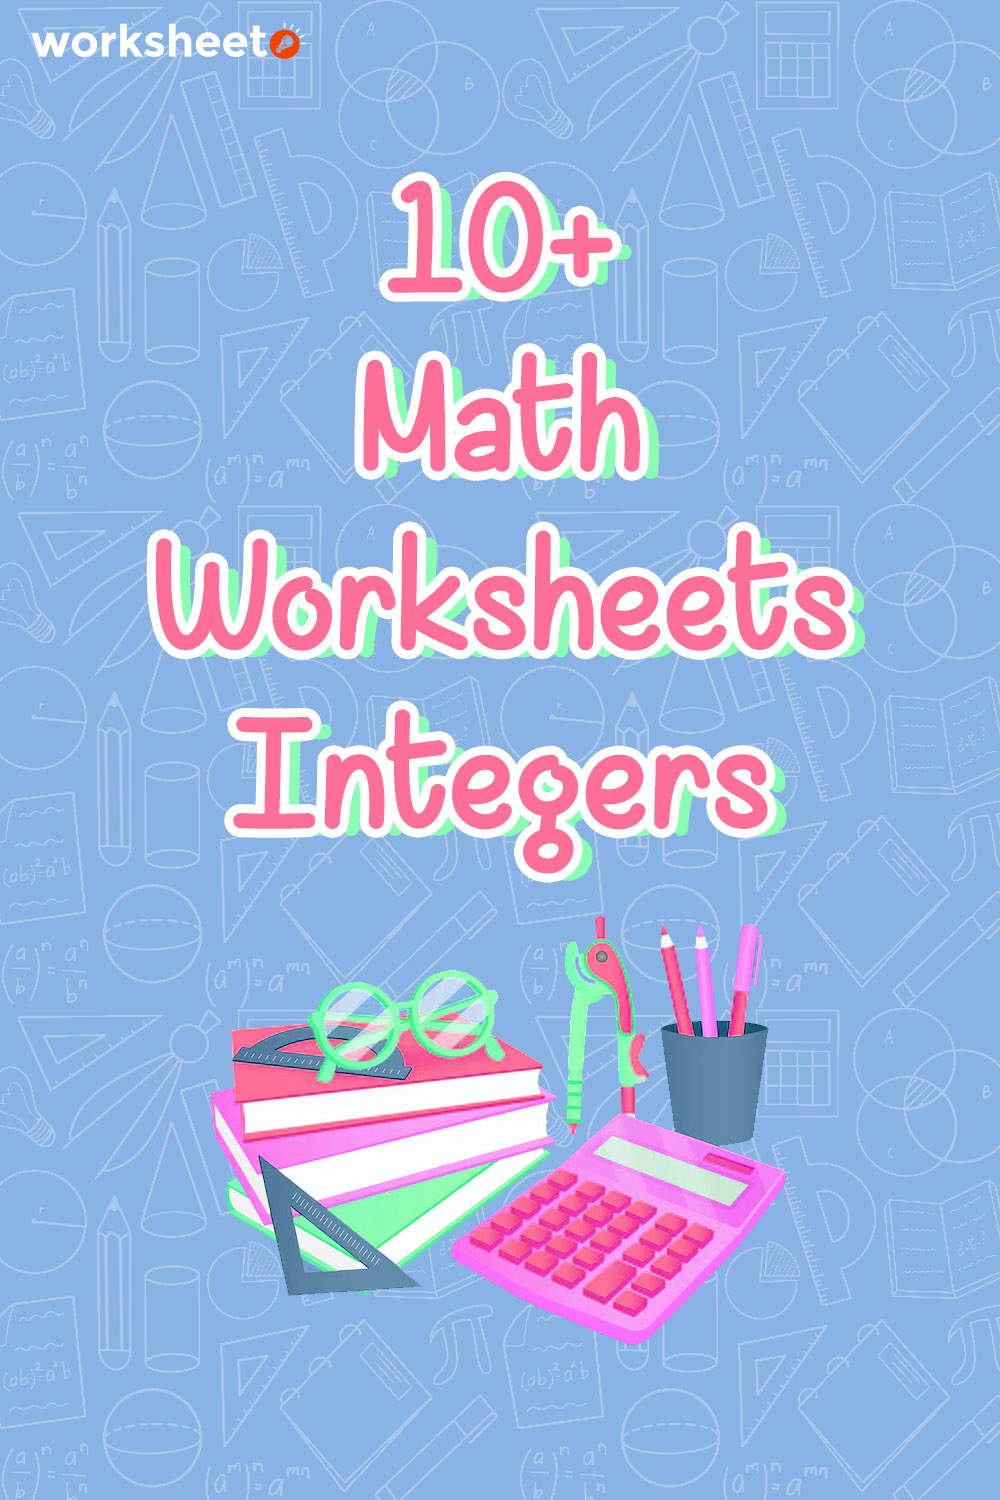 18 Images of Math Worksheets Integers